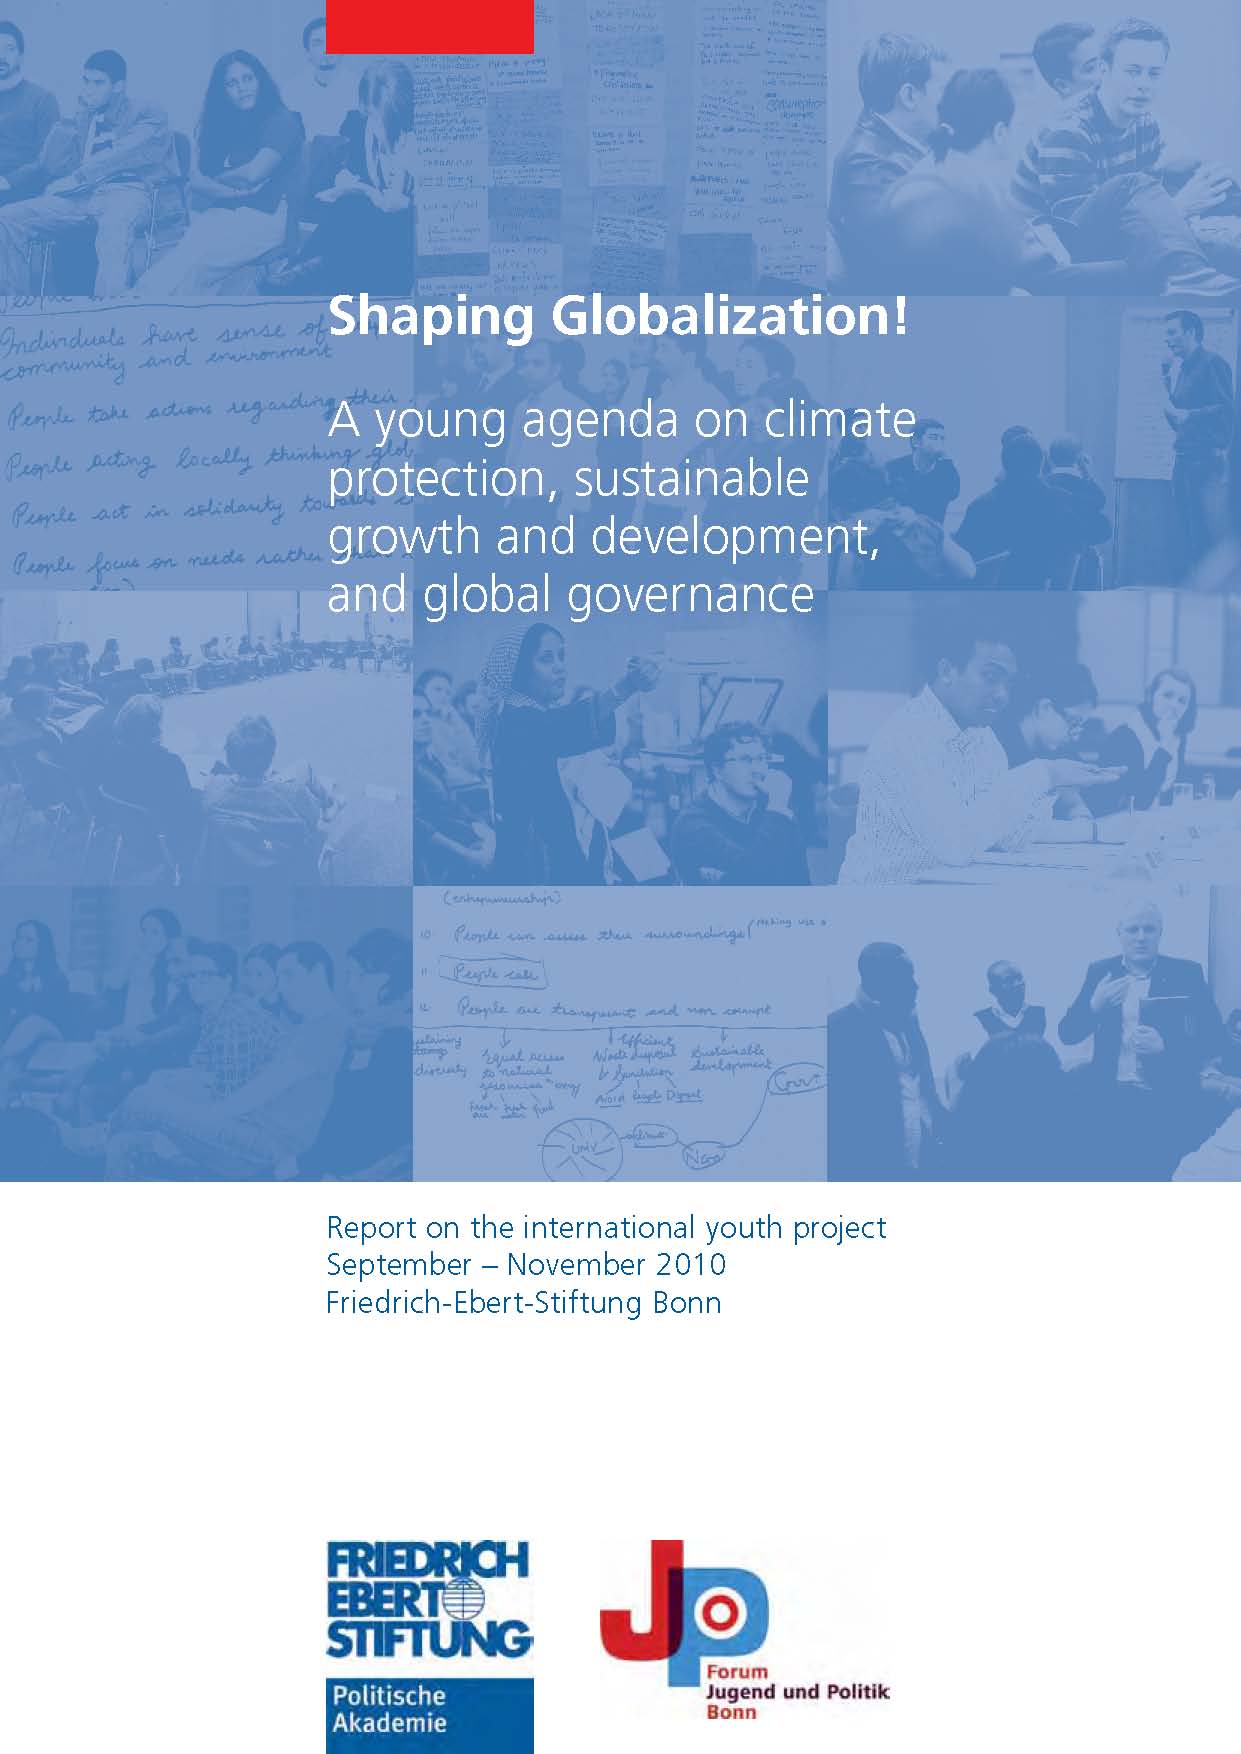 Shaping globalization: a young agenda on climate protection, sustainable growth and development, and global governance